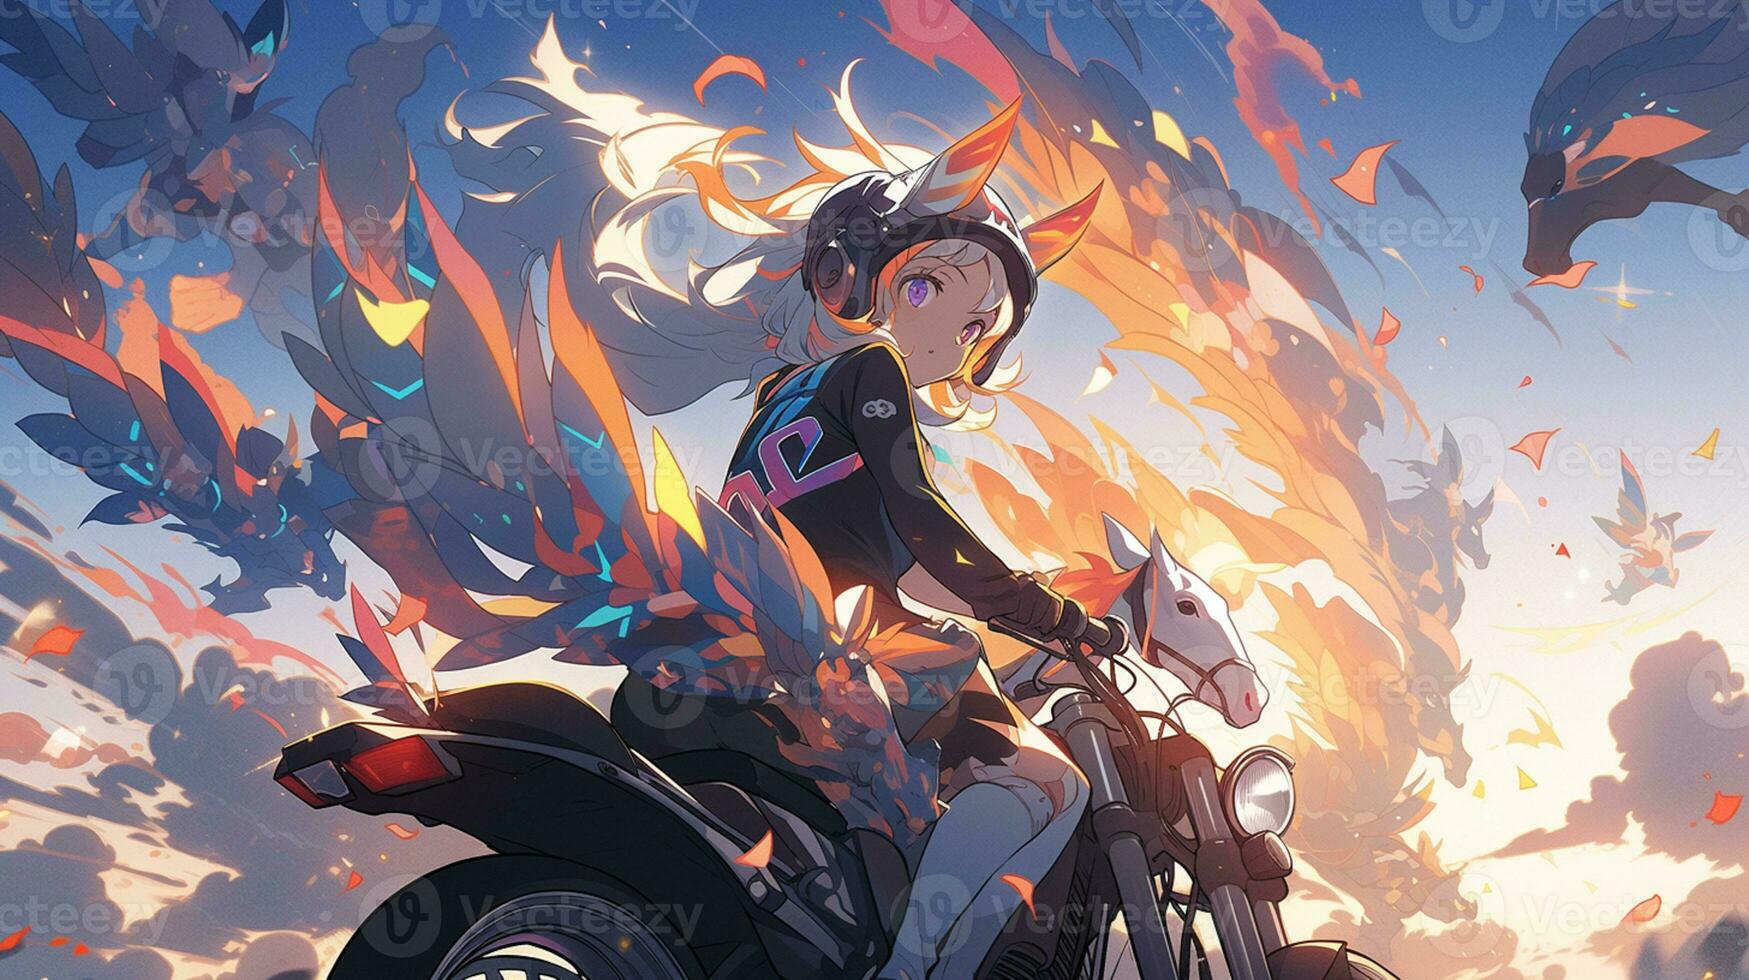 Anime Motorcycle by JazzBlends on DeviantArt